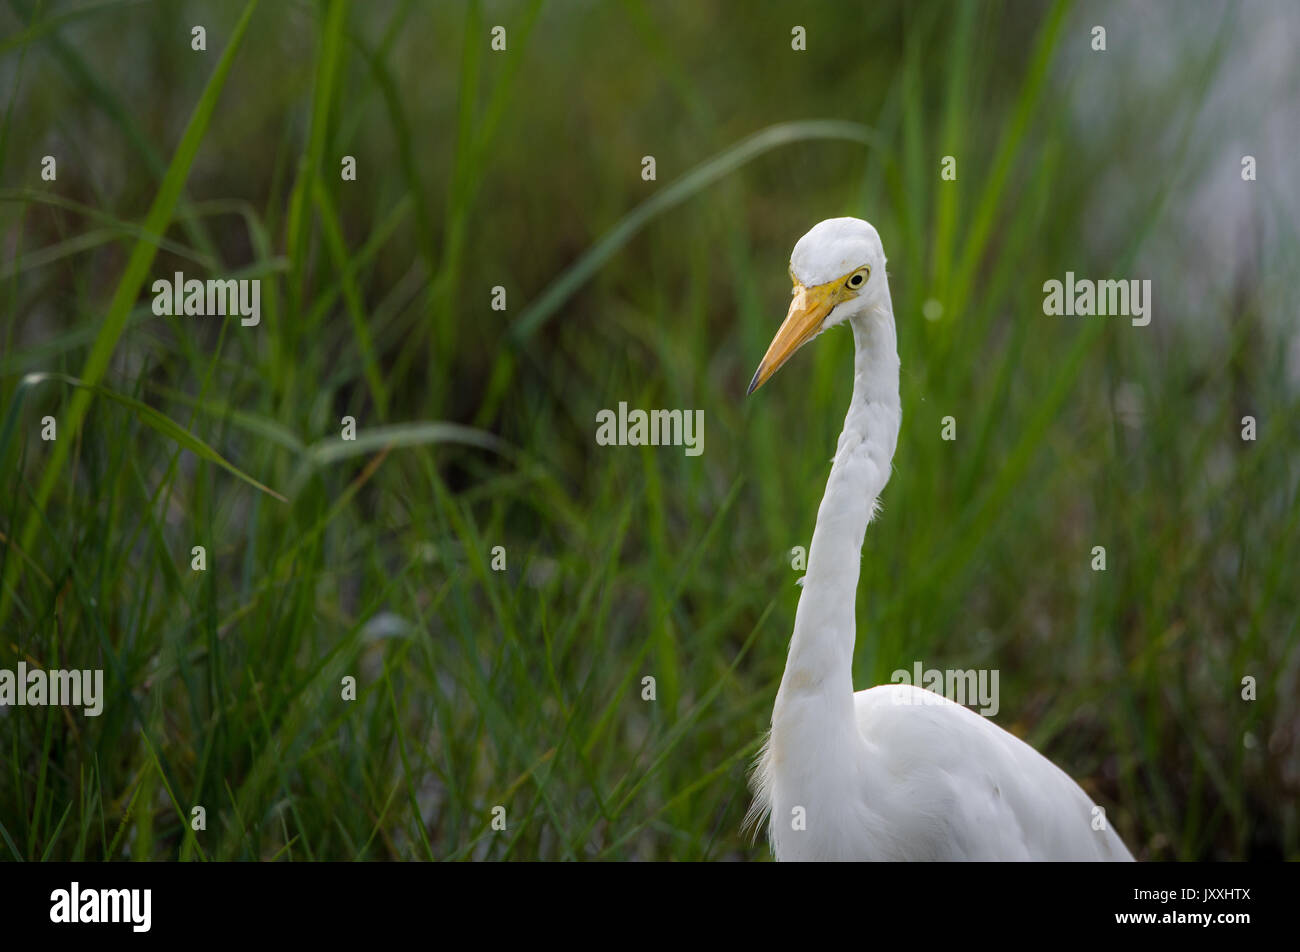 Great white egret in a paddy field Stock Photo